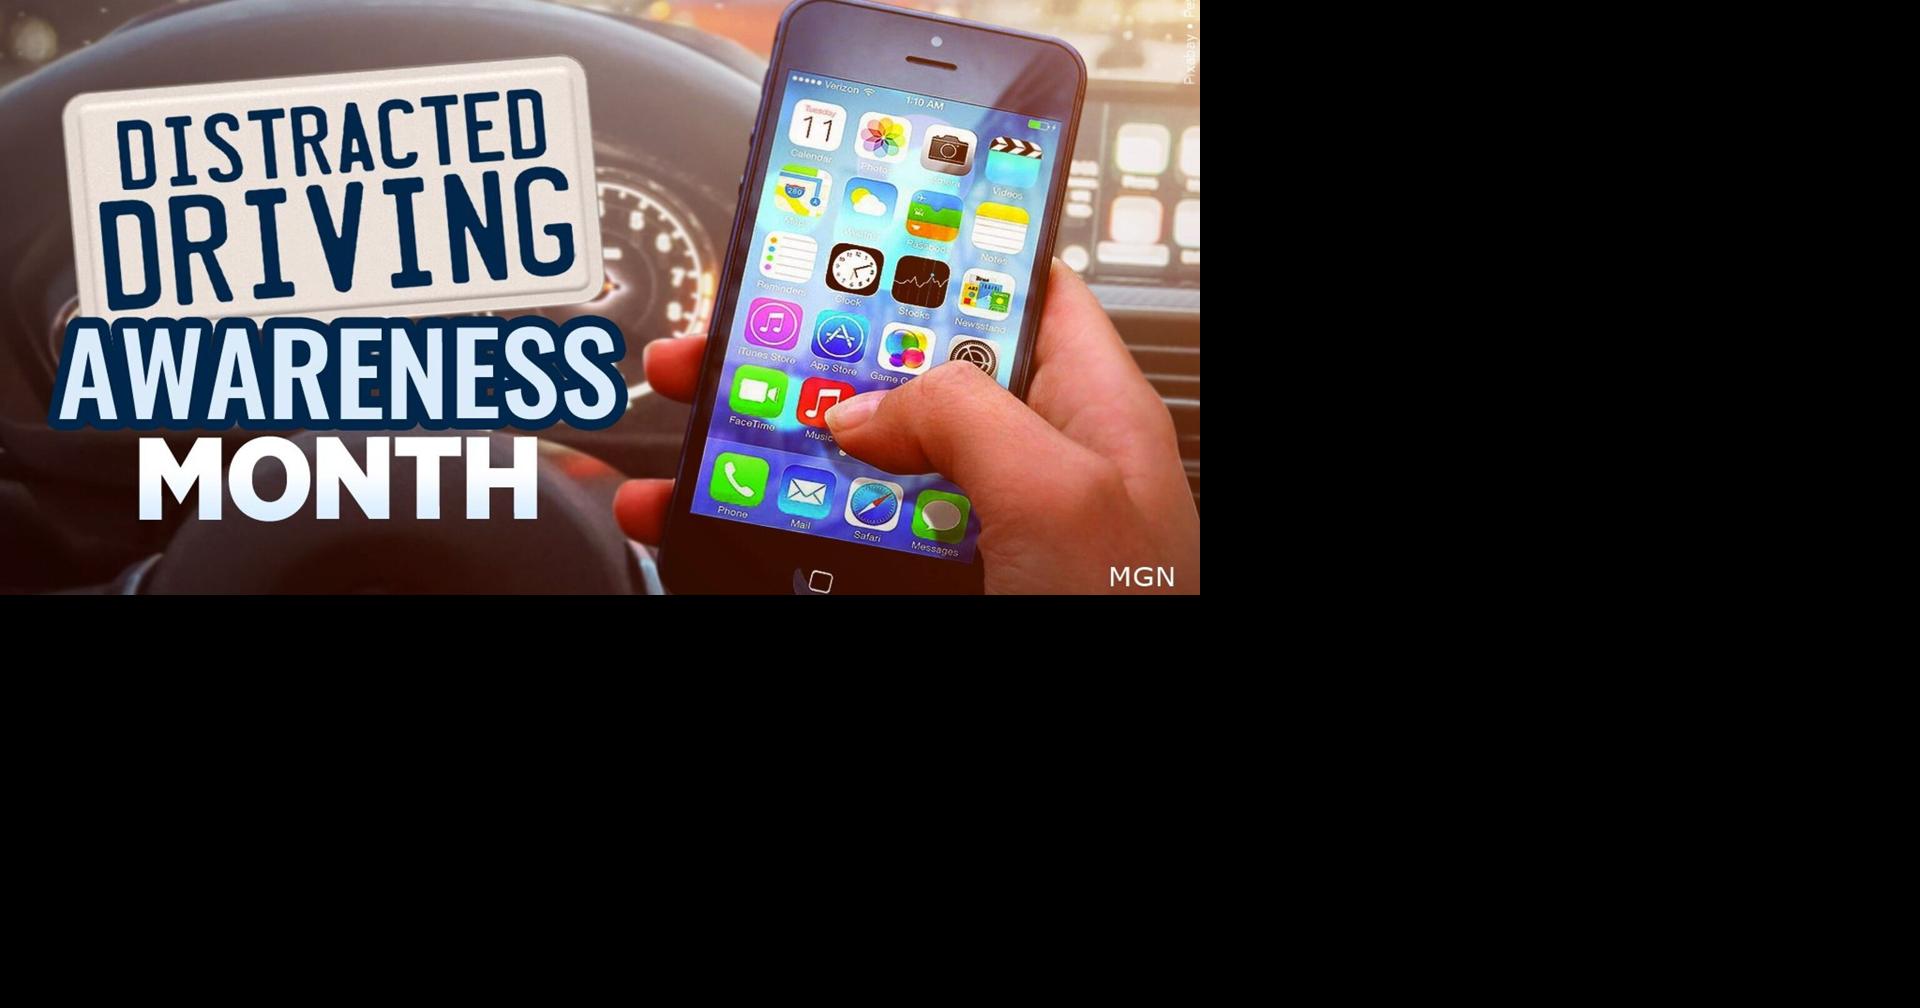 Distracted Driving Awareness Month: How police will crack down in Pennsylvania, New Jersey